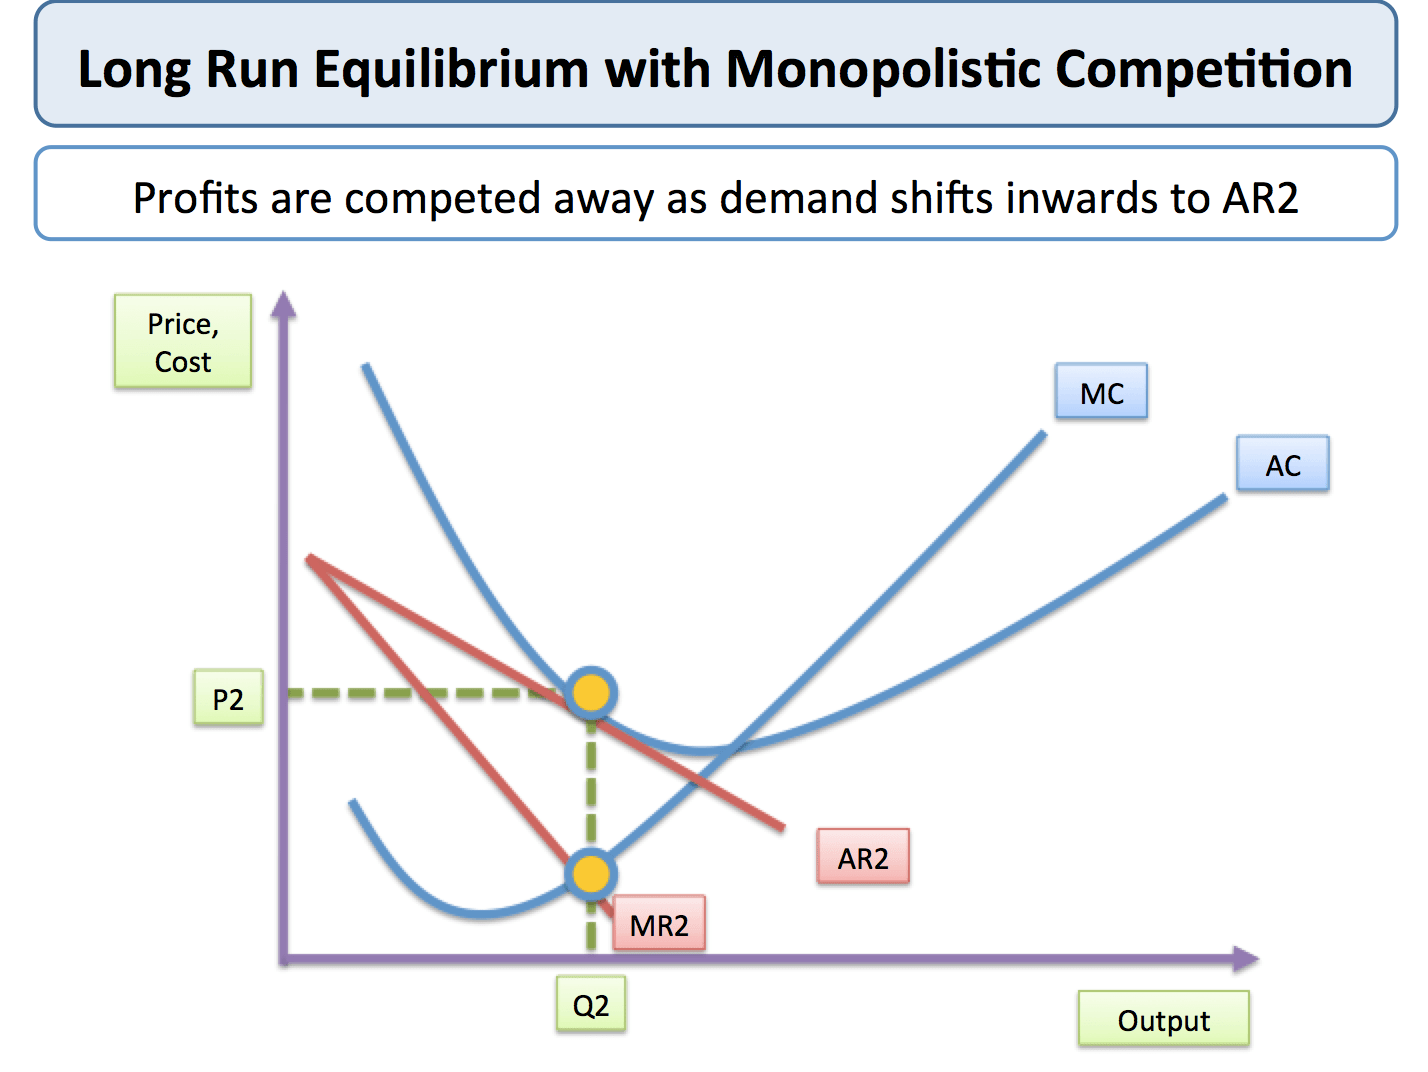 Long Run Equilibrium with Monopolistic Competition Profits are
competed away as demand shifts inwards to AR2 Price, Cost 1 AC AR2 MR2
Output 